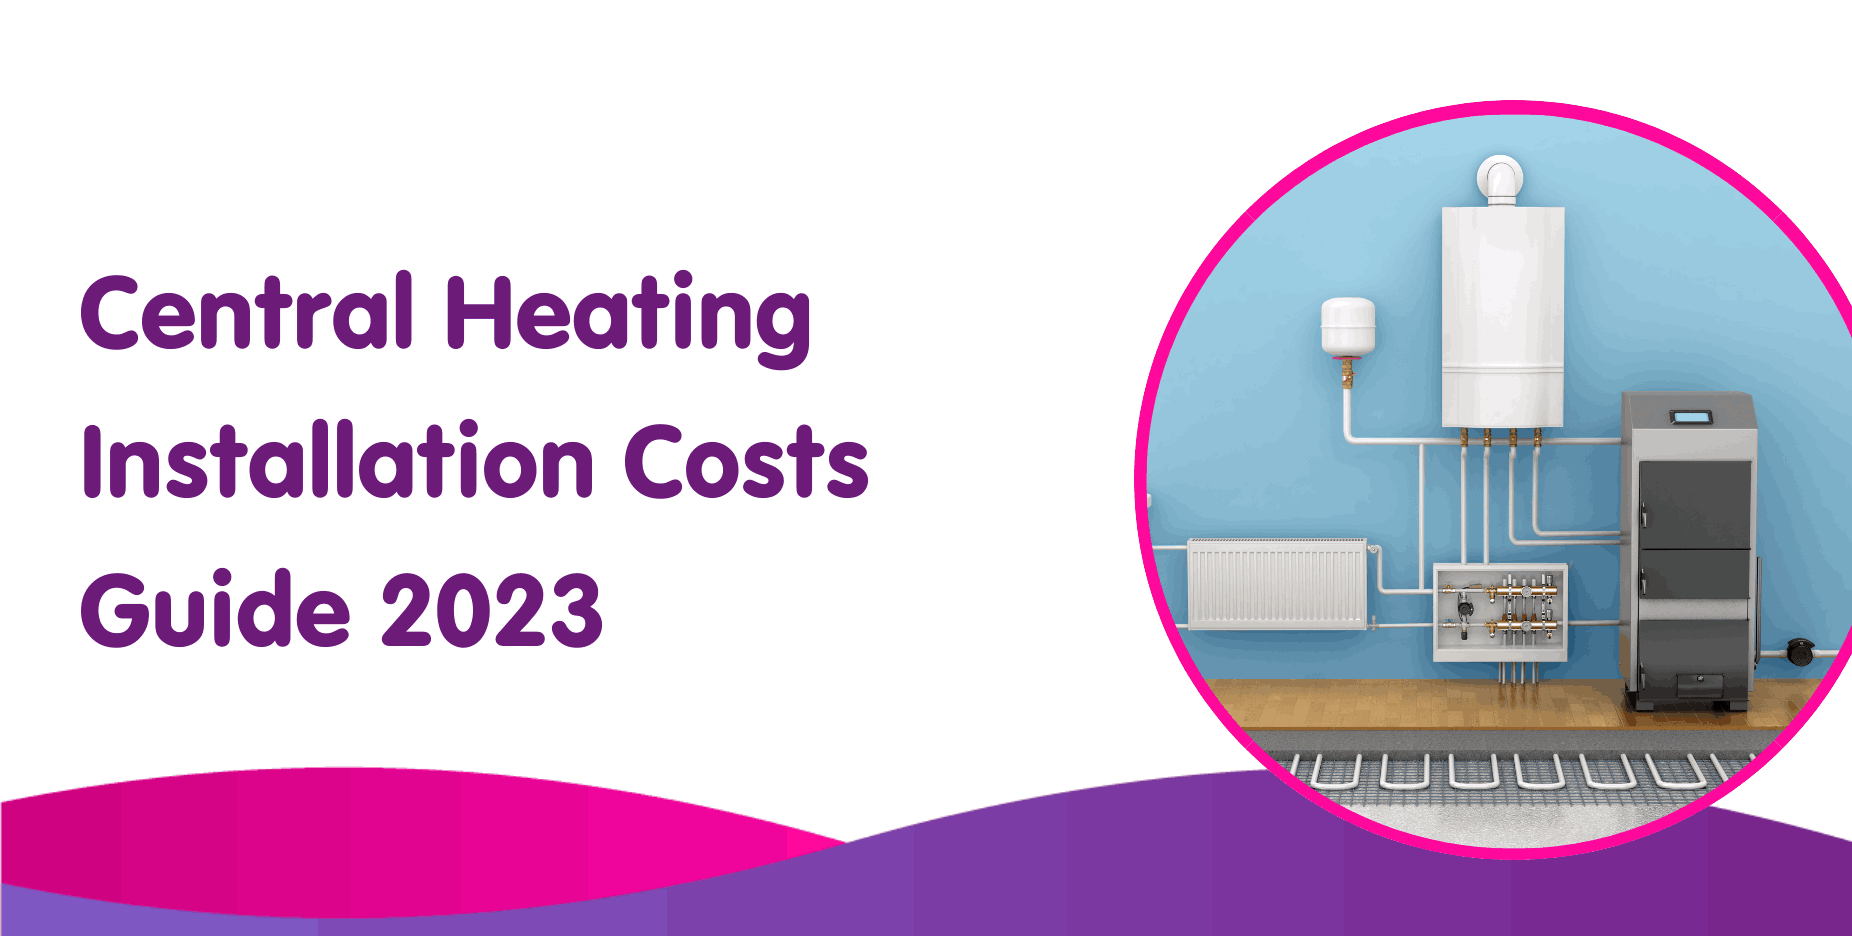 Central Heating Installation Costs Guide 2023